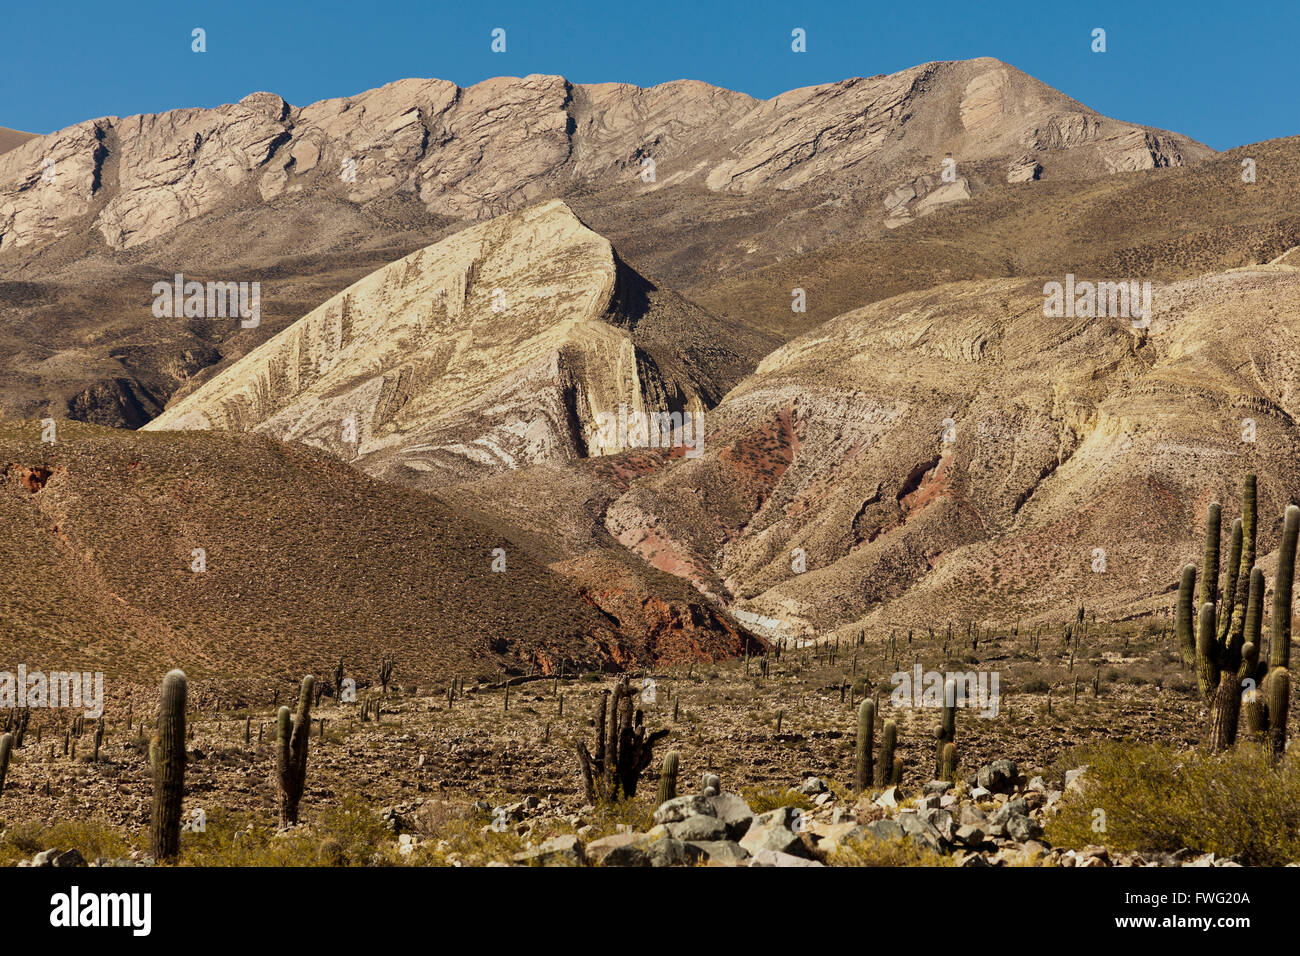 Typical Andean landscape, Tilcara, Argentina Stock Photo